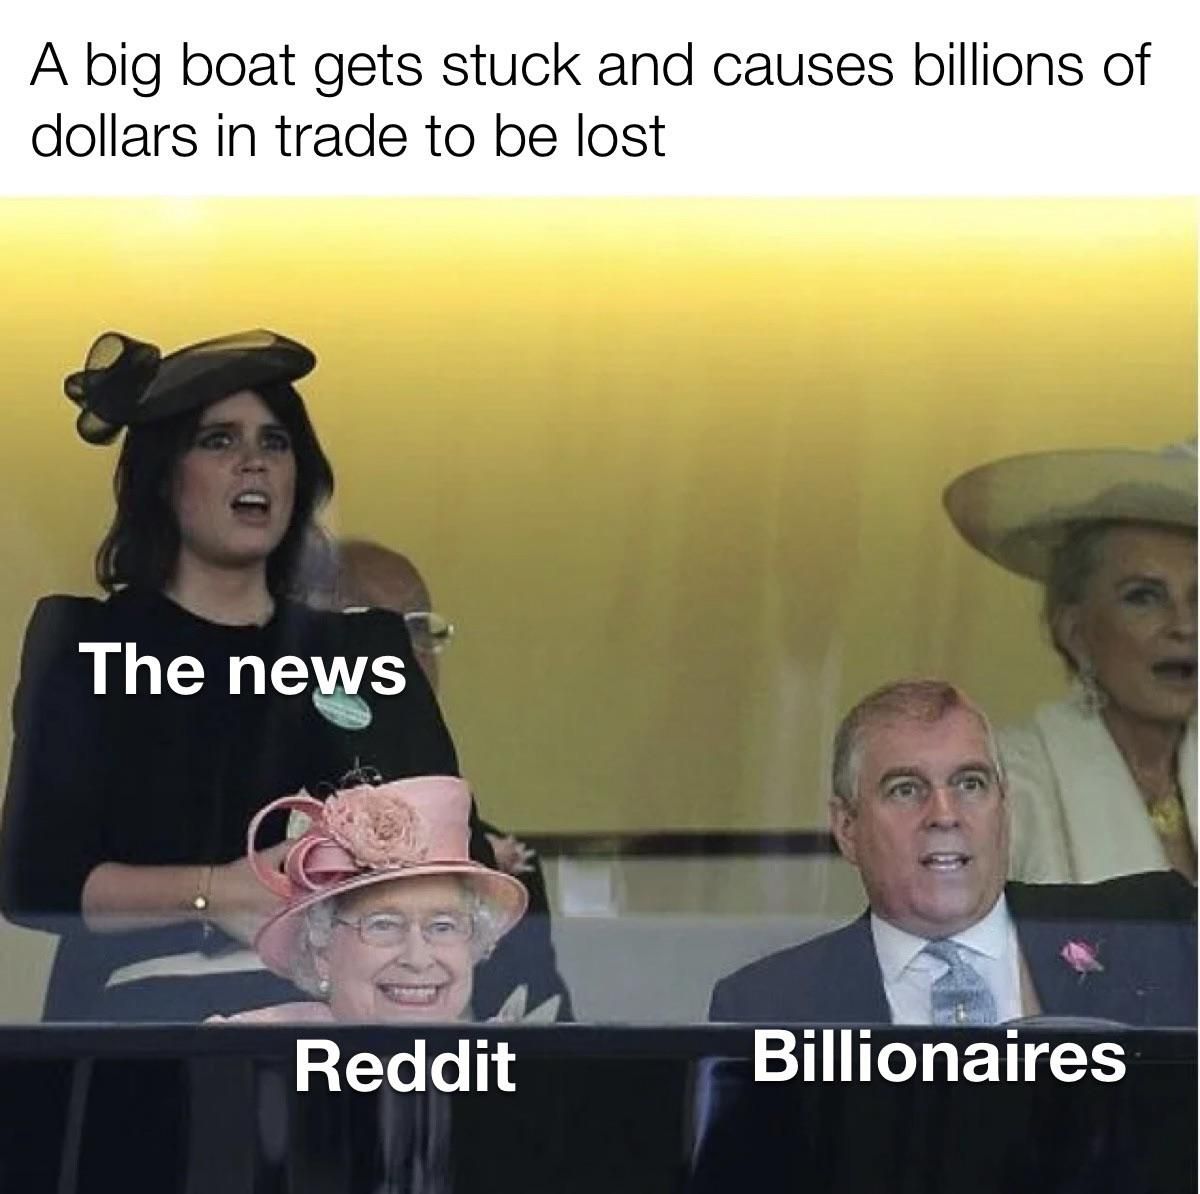 That boat too damn thicc